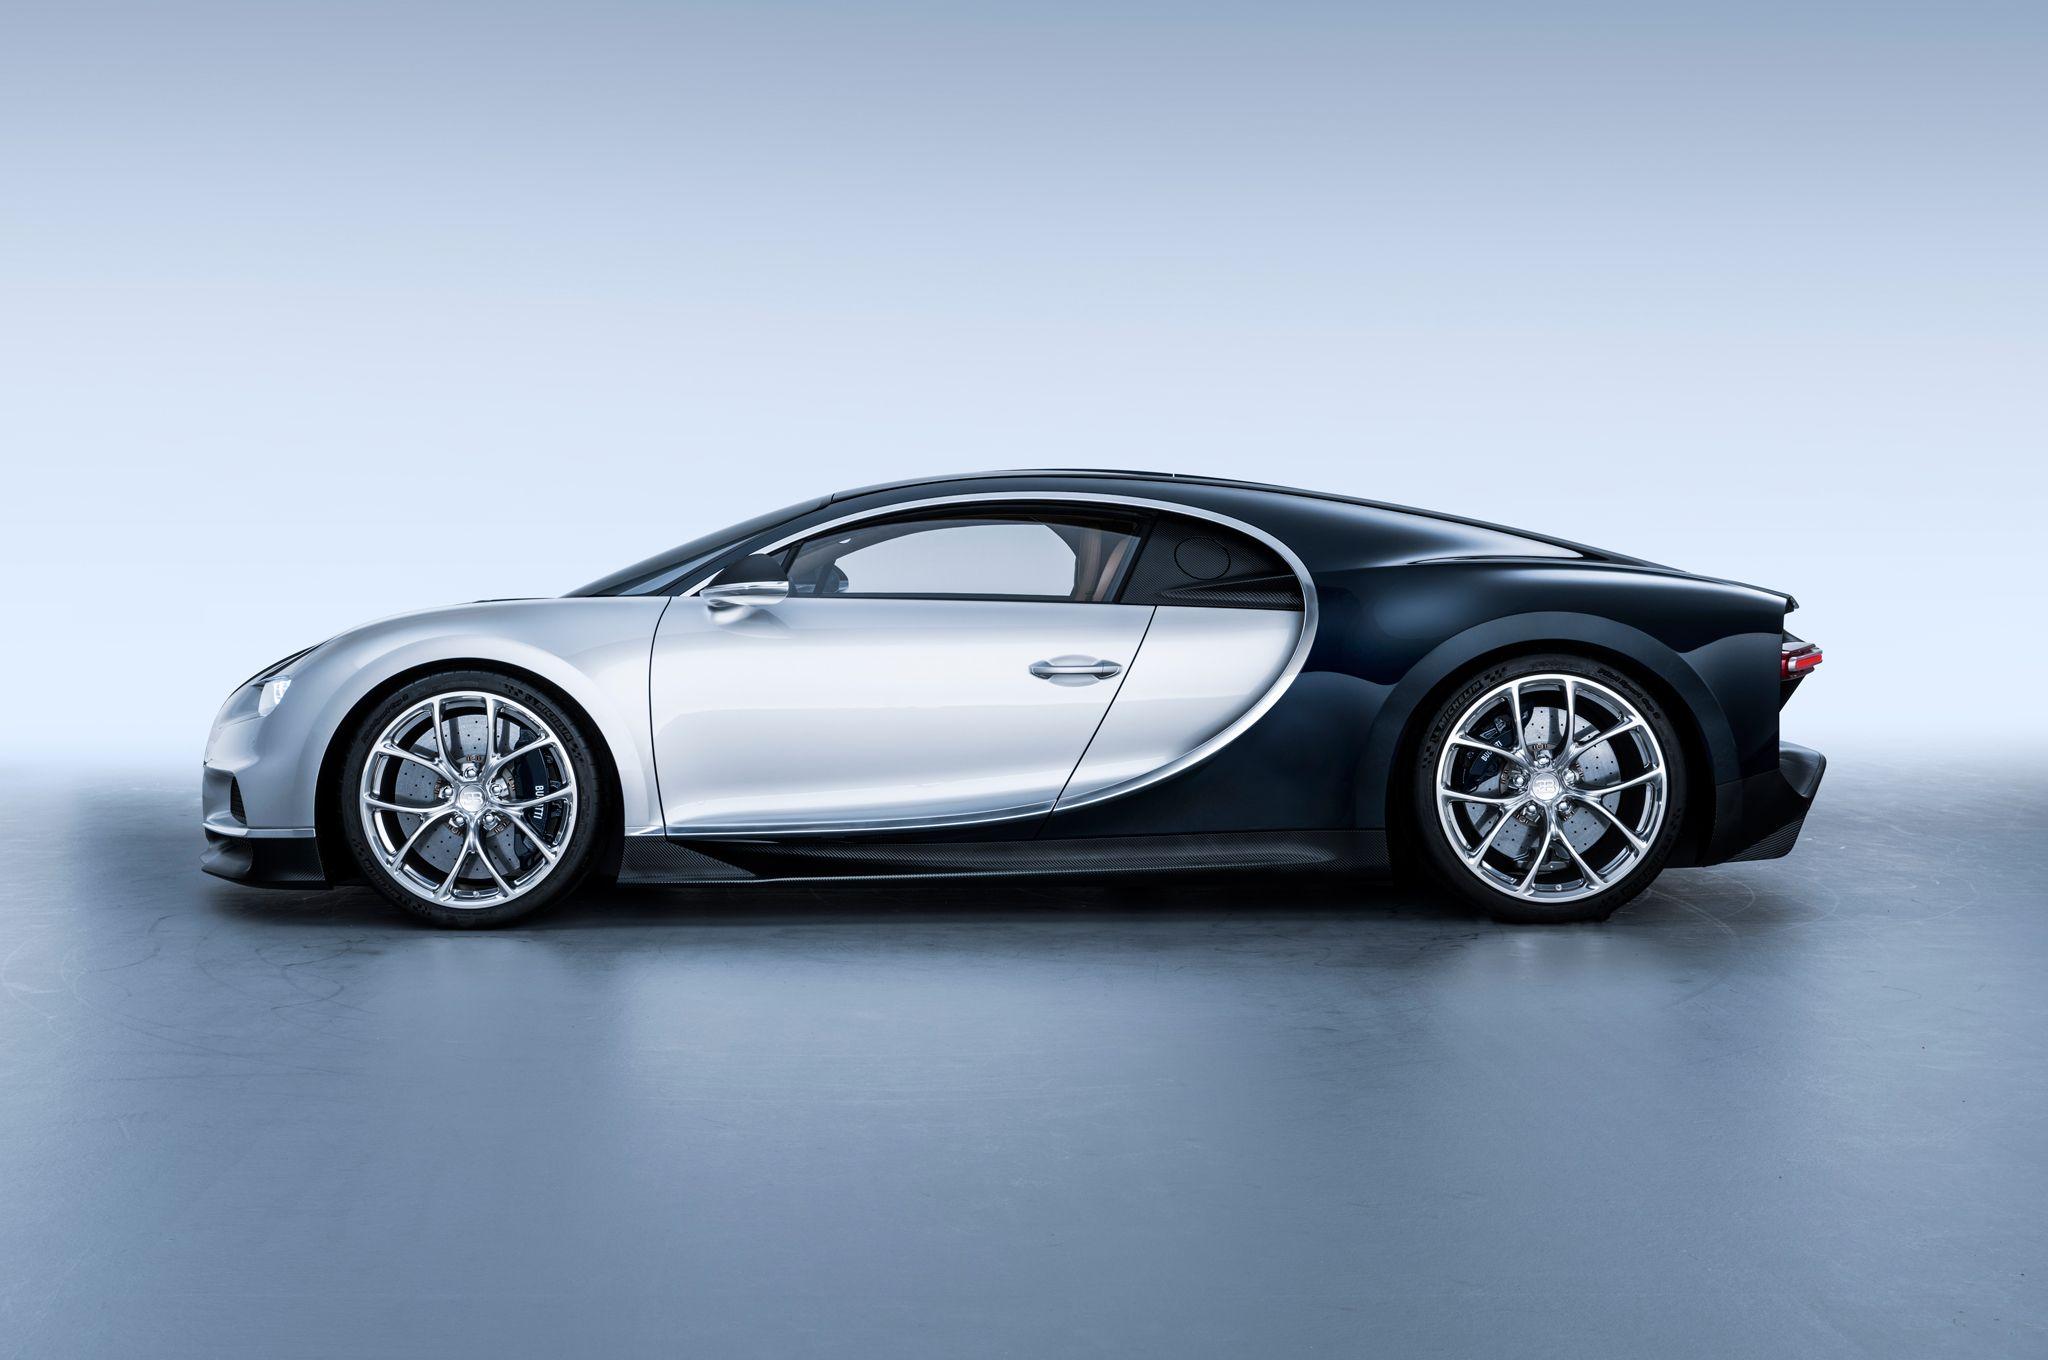 Bugatti Chiron First Look Review: Resetting the Benchmark